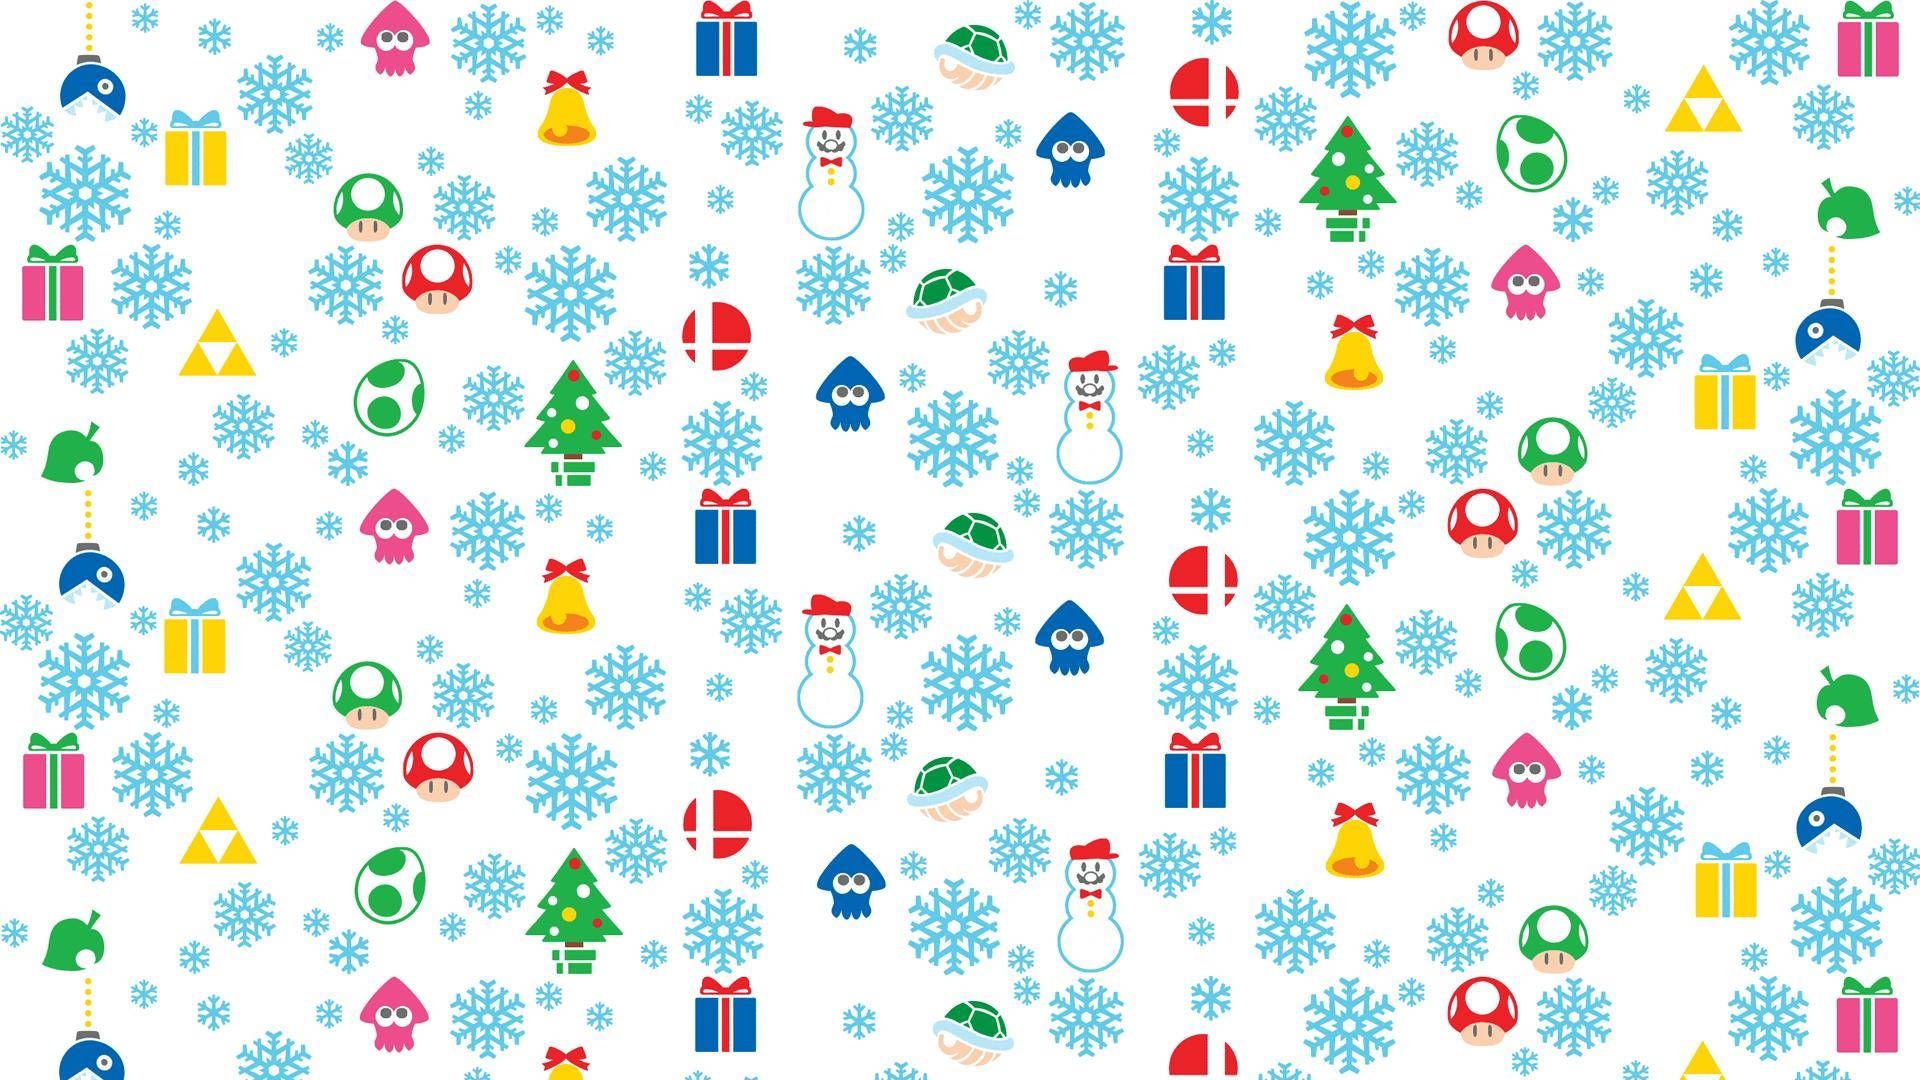 Christmas pattern with snowflakes and gift boxes on a white background - Nintendo